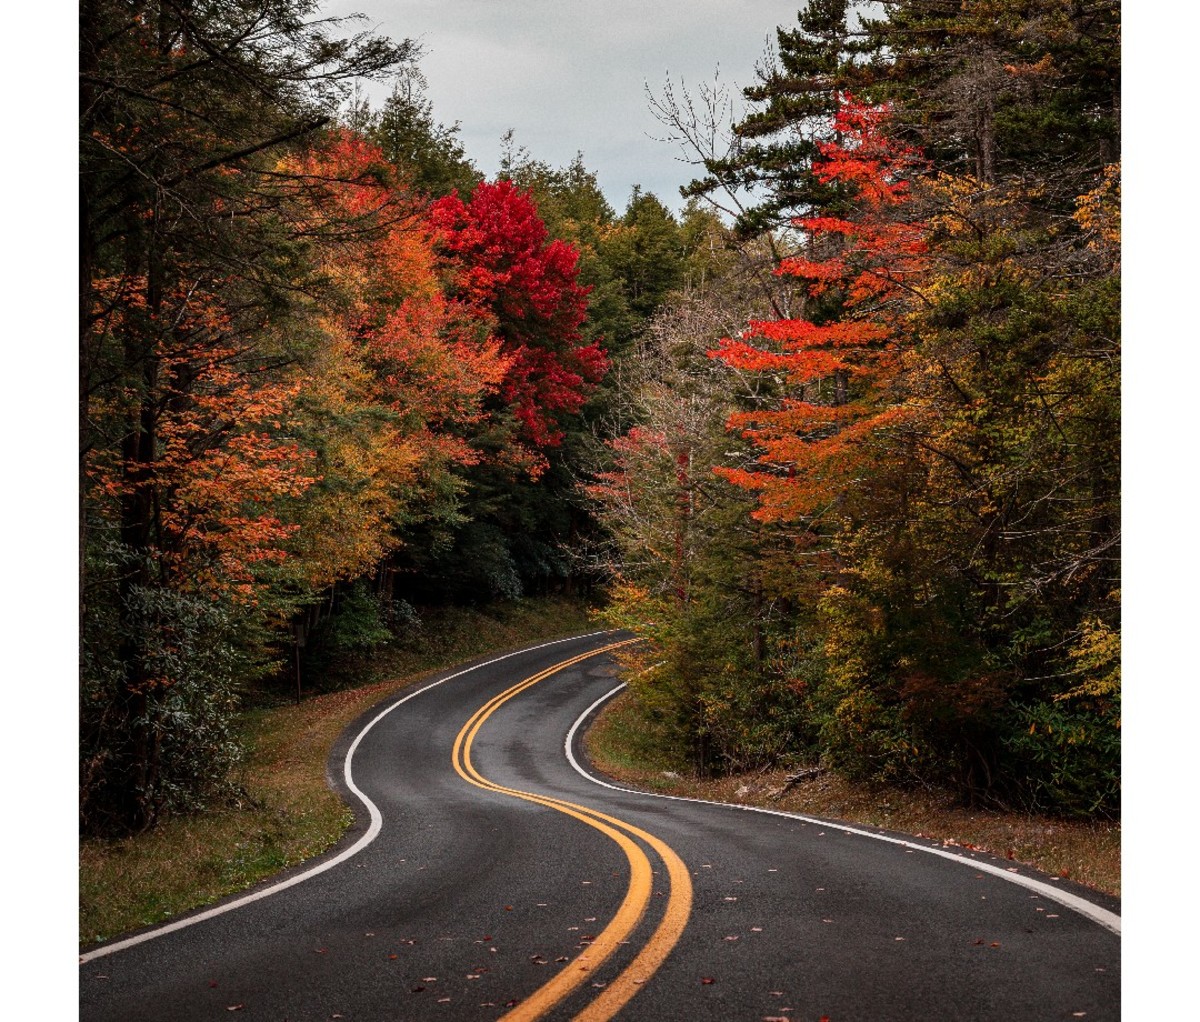 Road with fall foliage